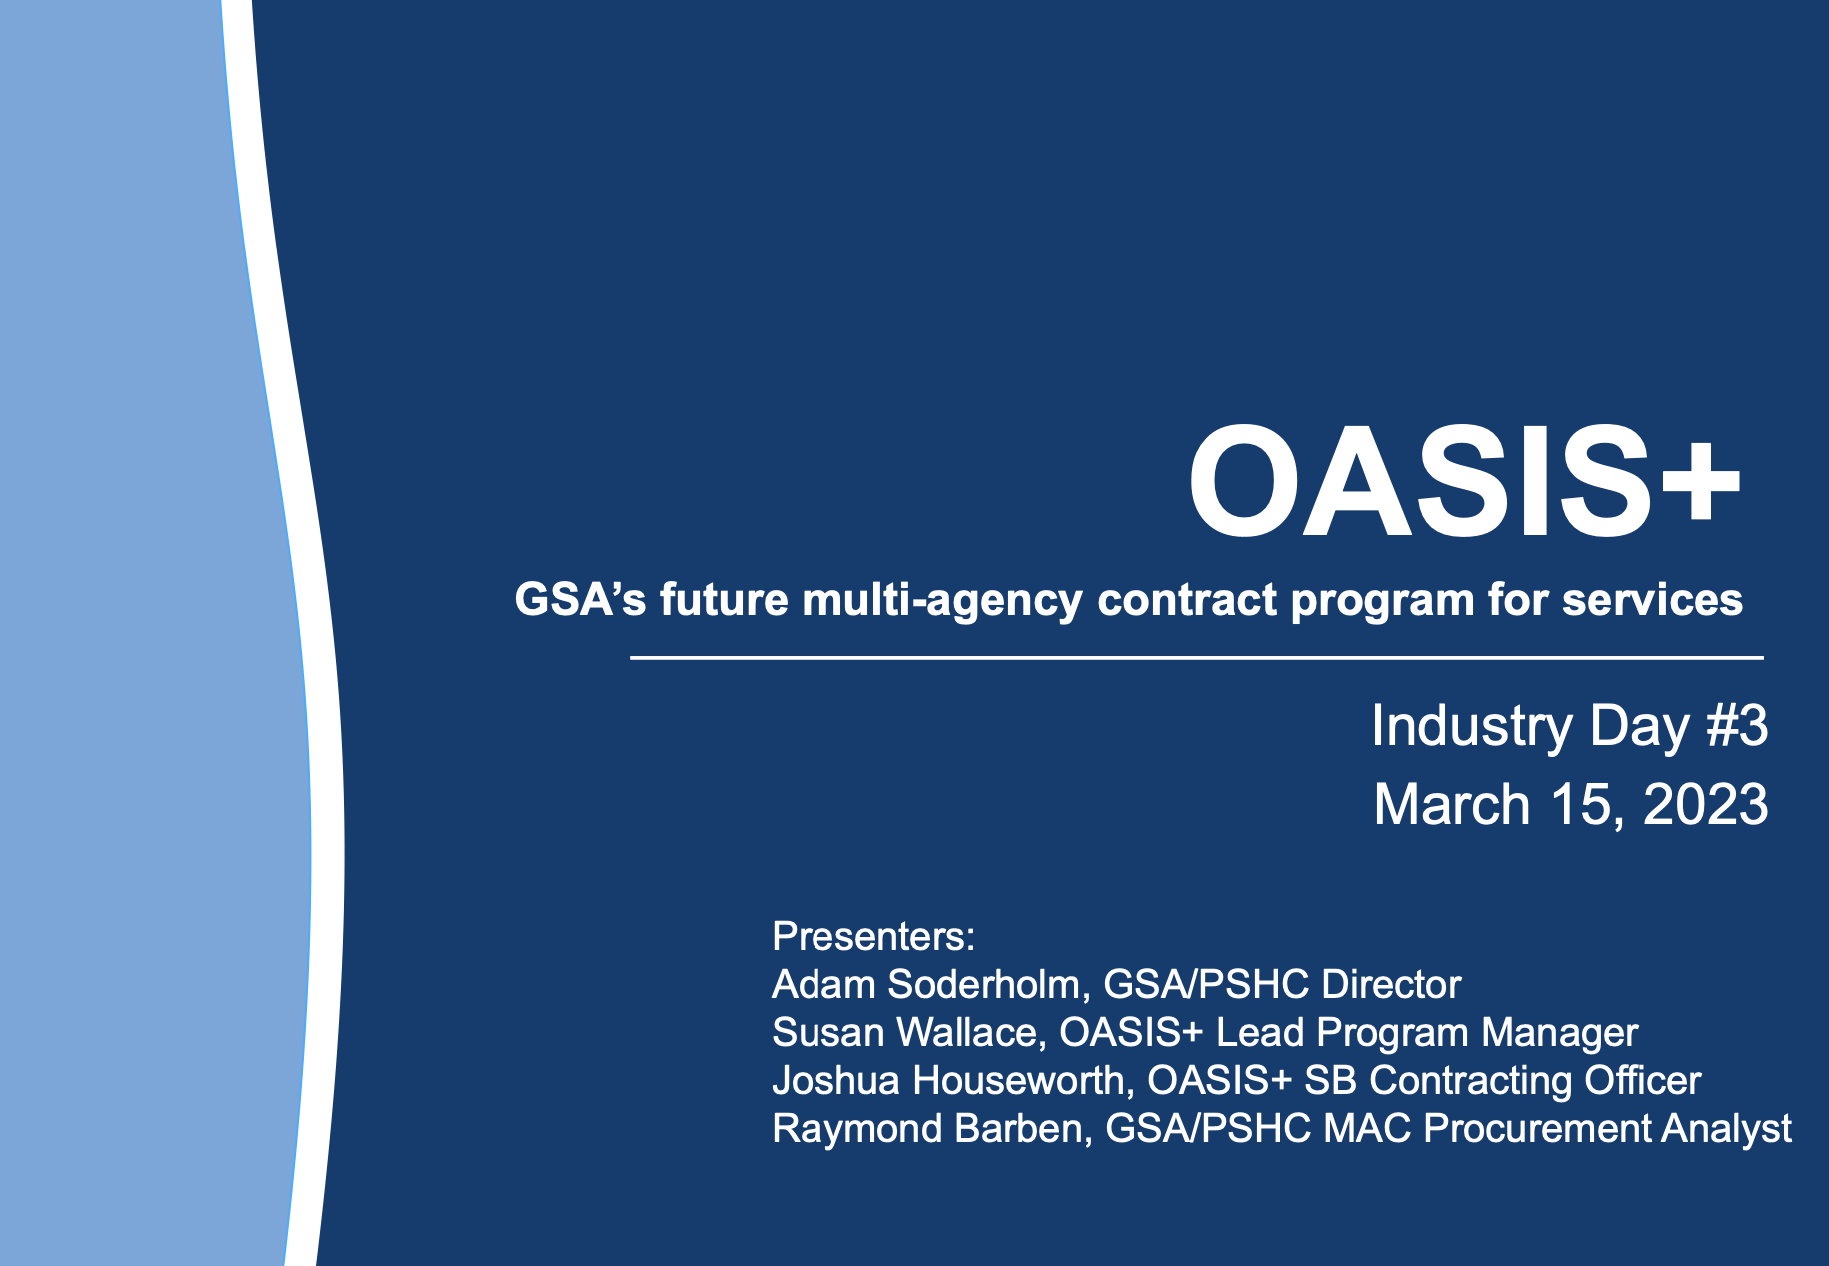 OASIS+ Final RFP Expected Released March 30 for GSA’s $60 Billion GWAC